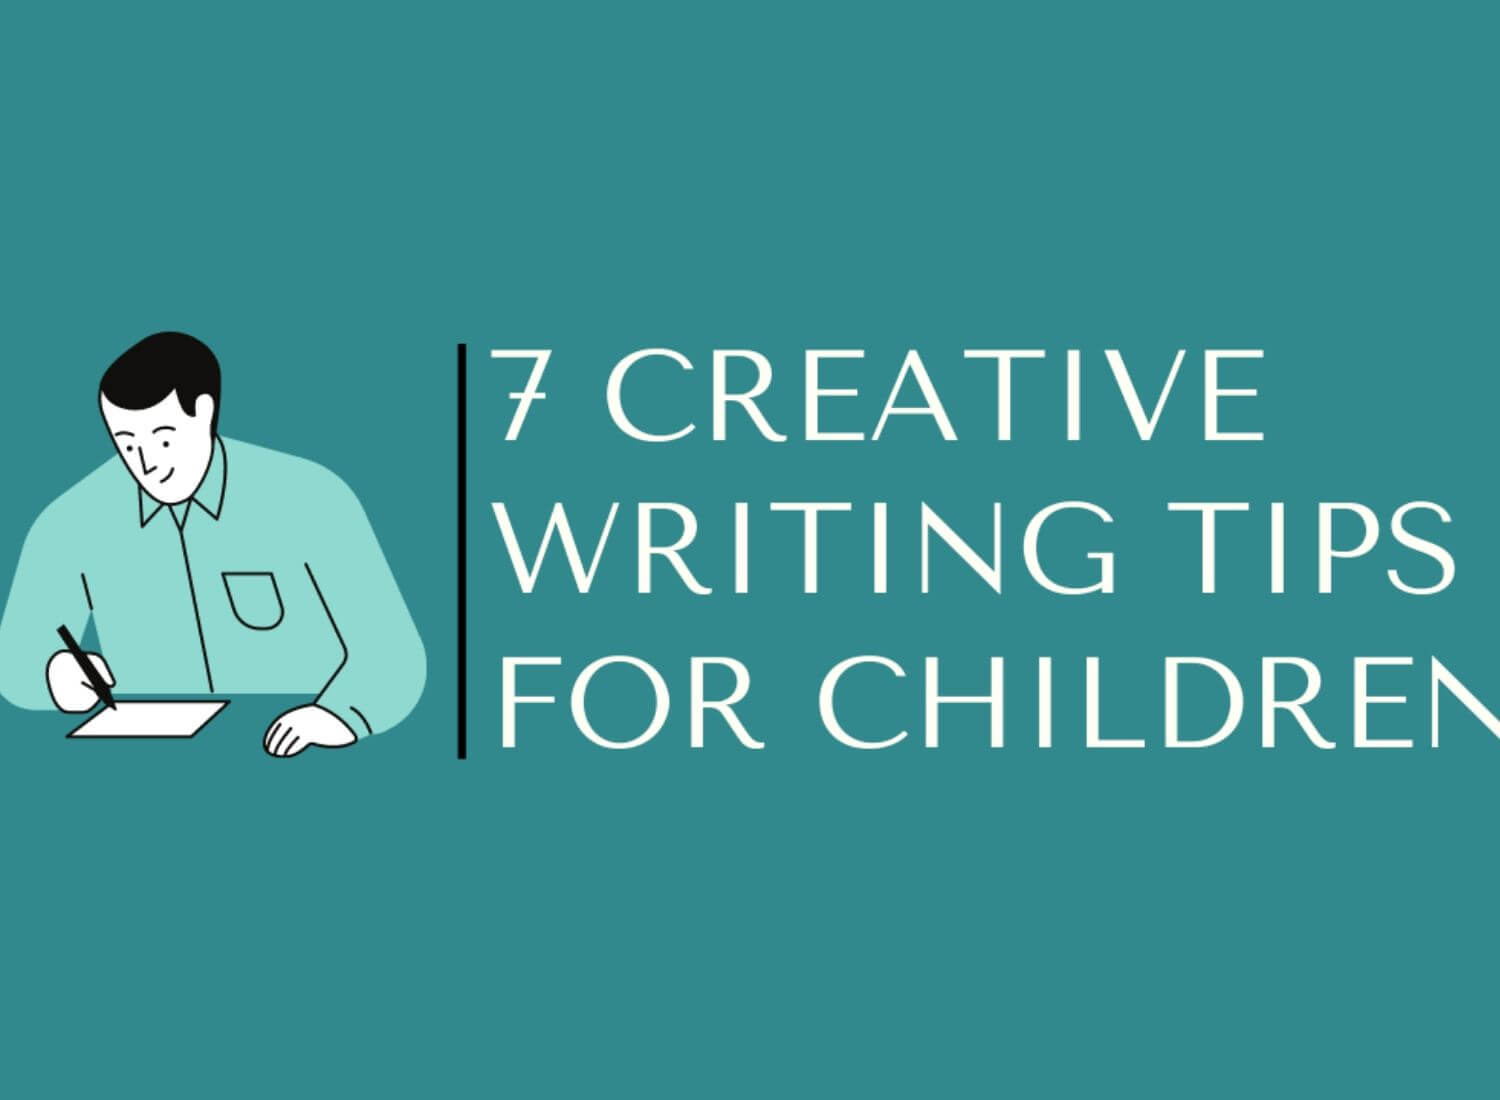 7 Creative Writing Tips For Children